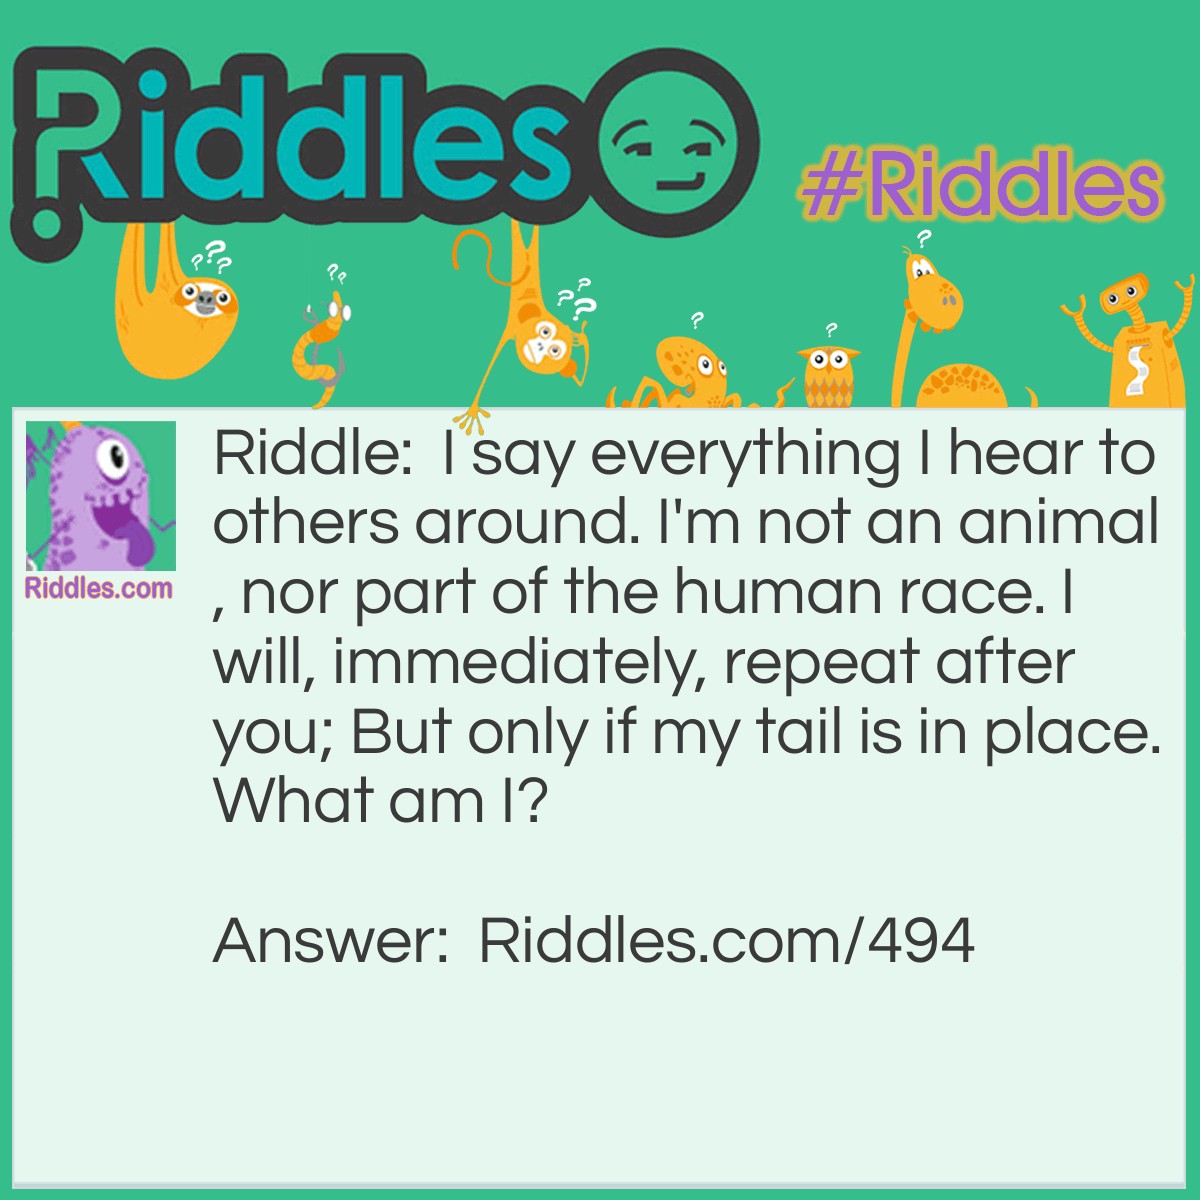 Riddle: I say everything I hear to others around. I'm not an animal, nor part of the human race. I will, immediately, repeat after you; But only if my tail is in place. What am I? Answer: A microphone.